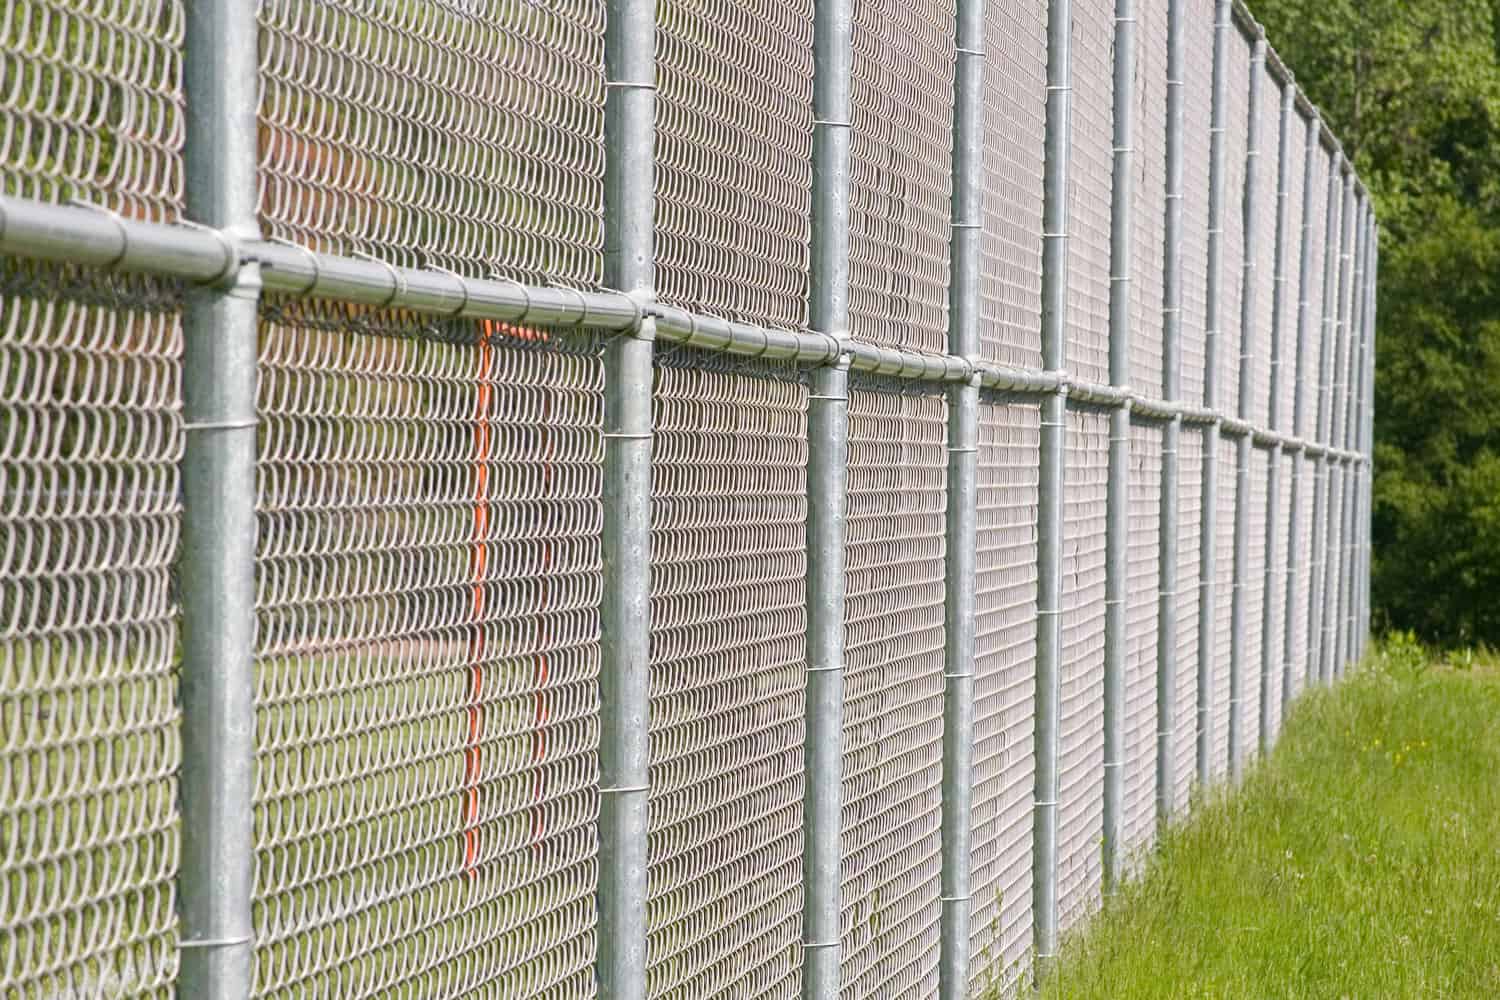 a tall chain link fence borders a playing field